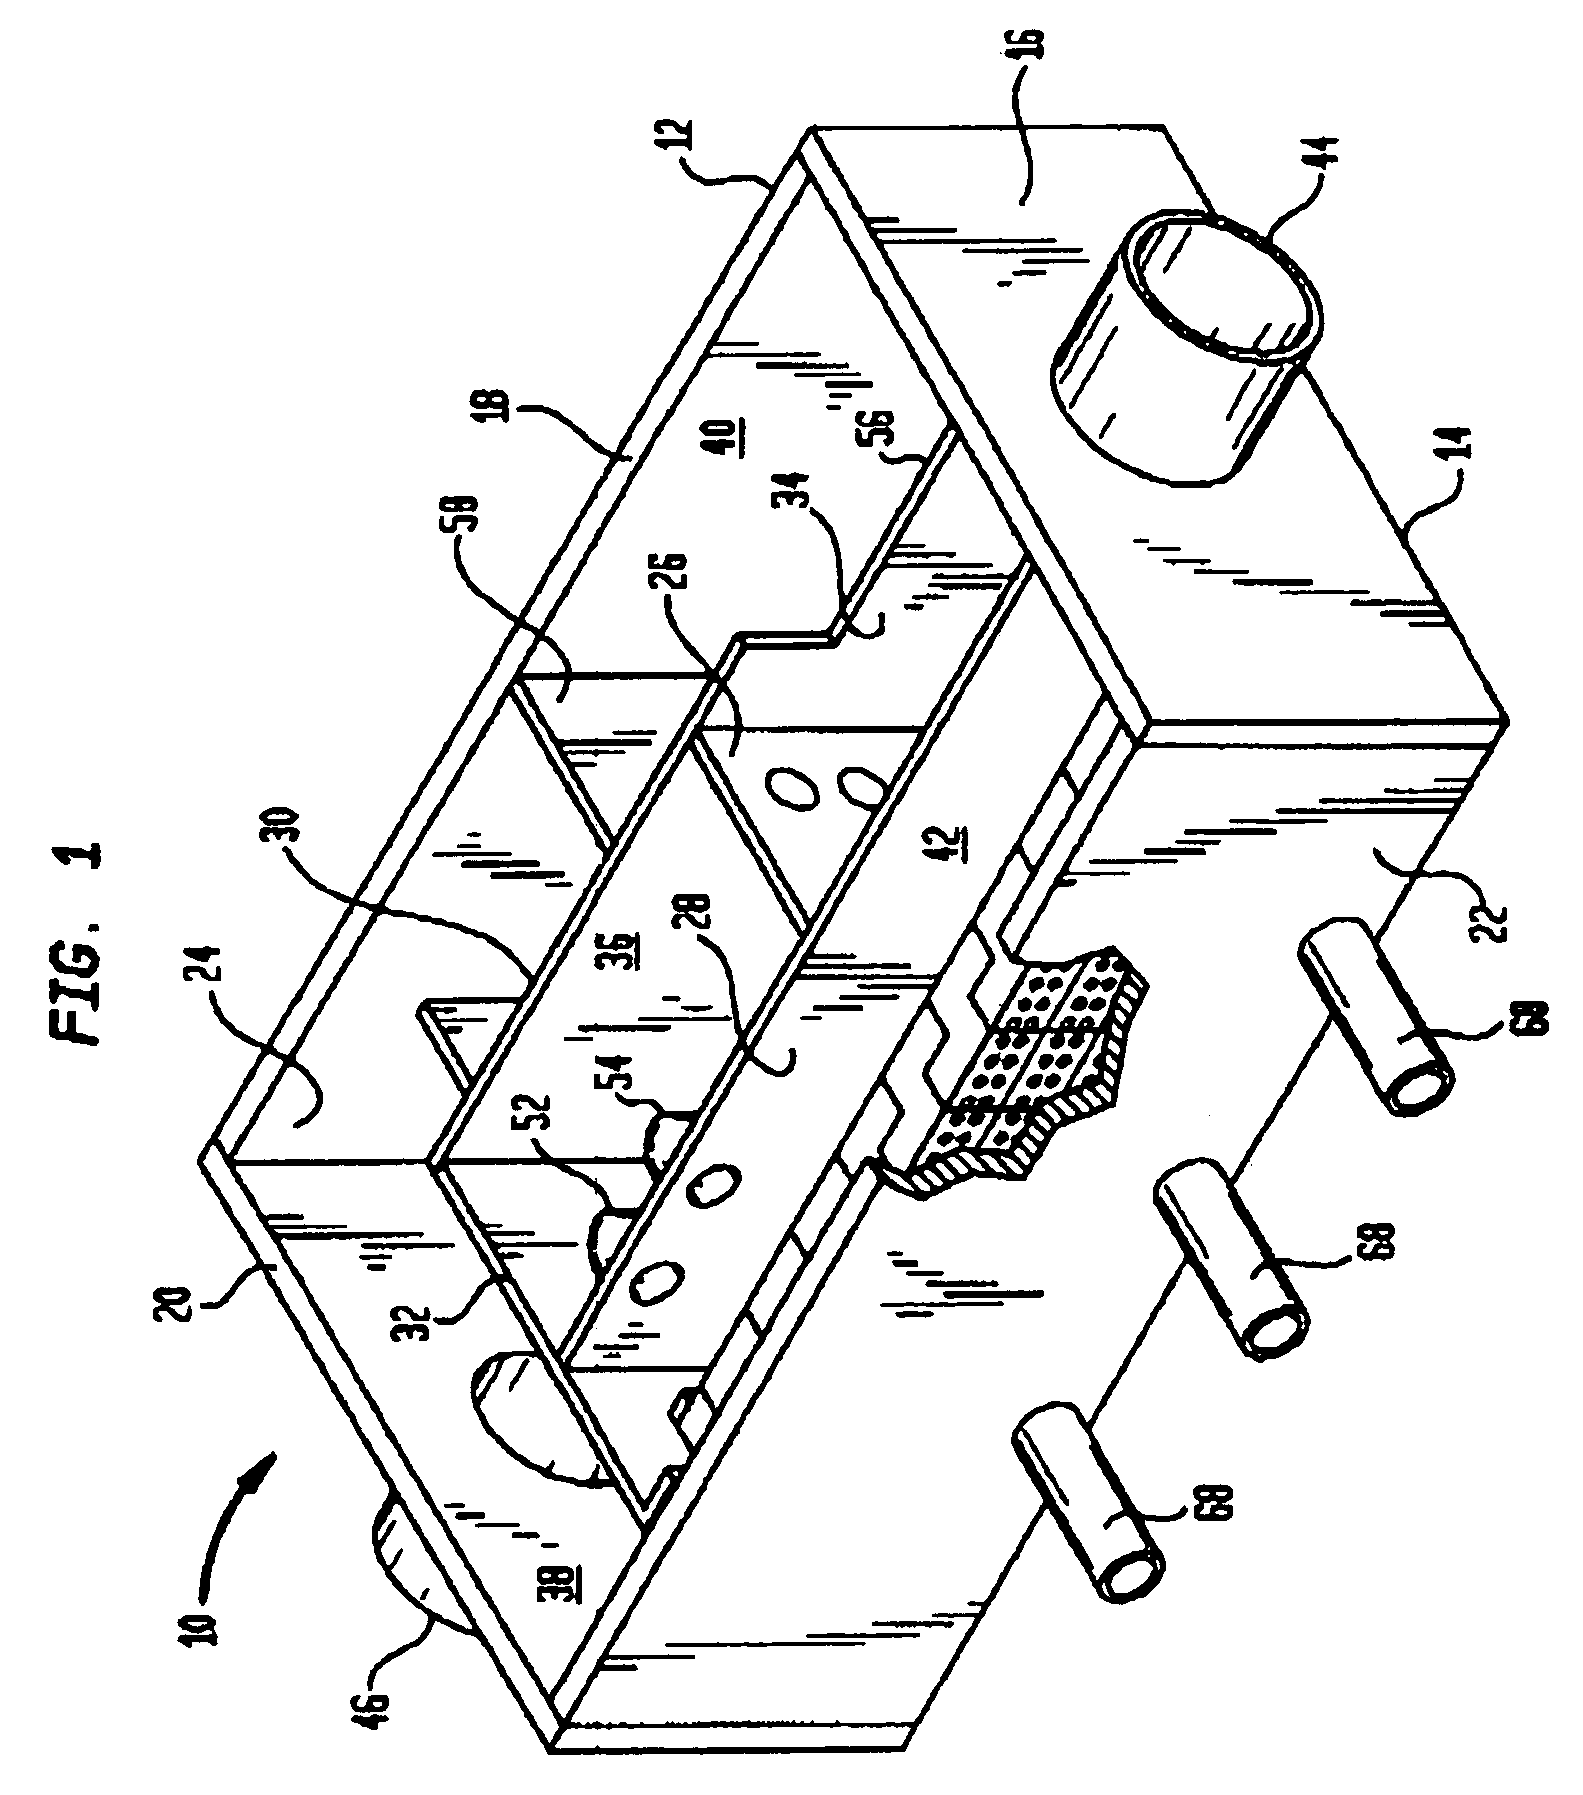 Apparatus for treating storm water